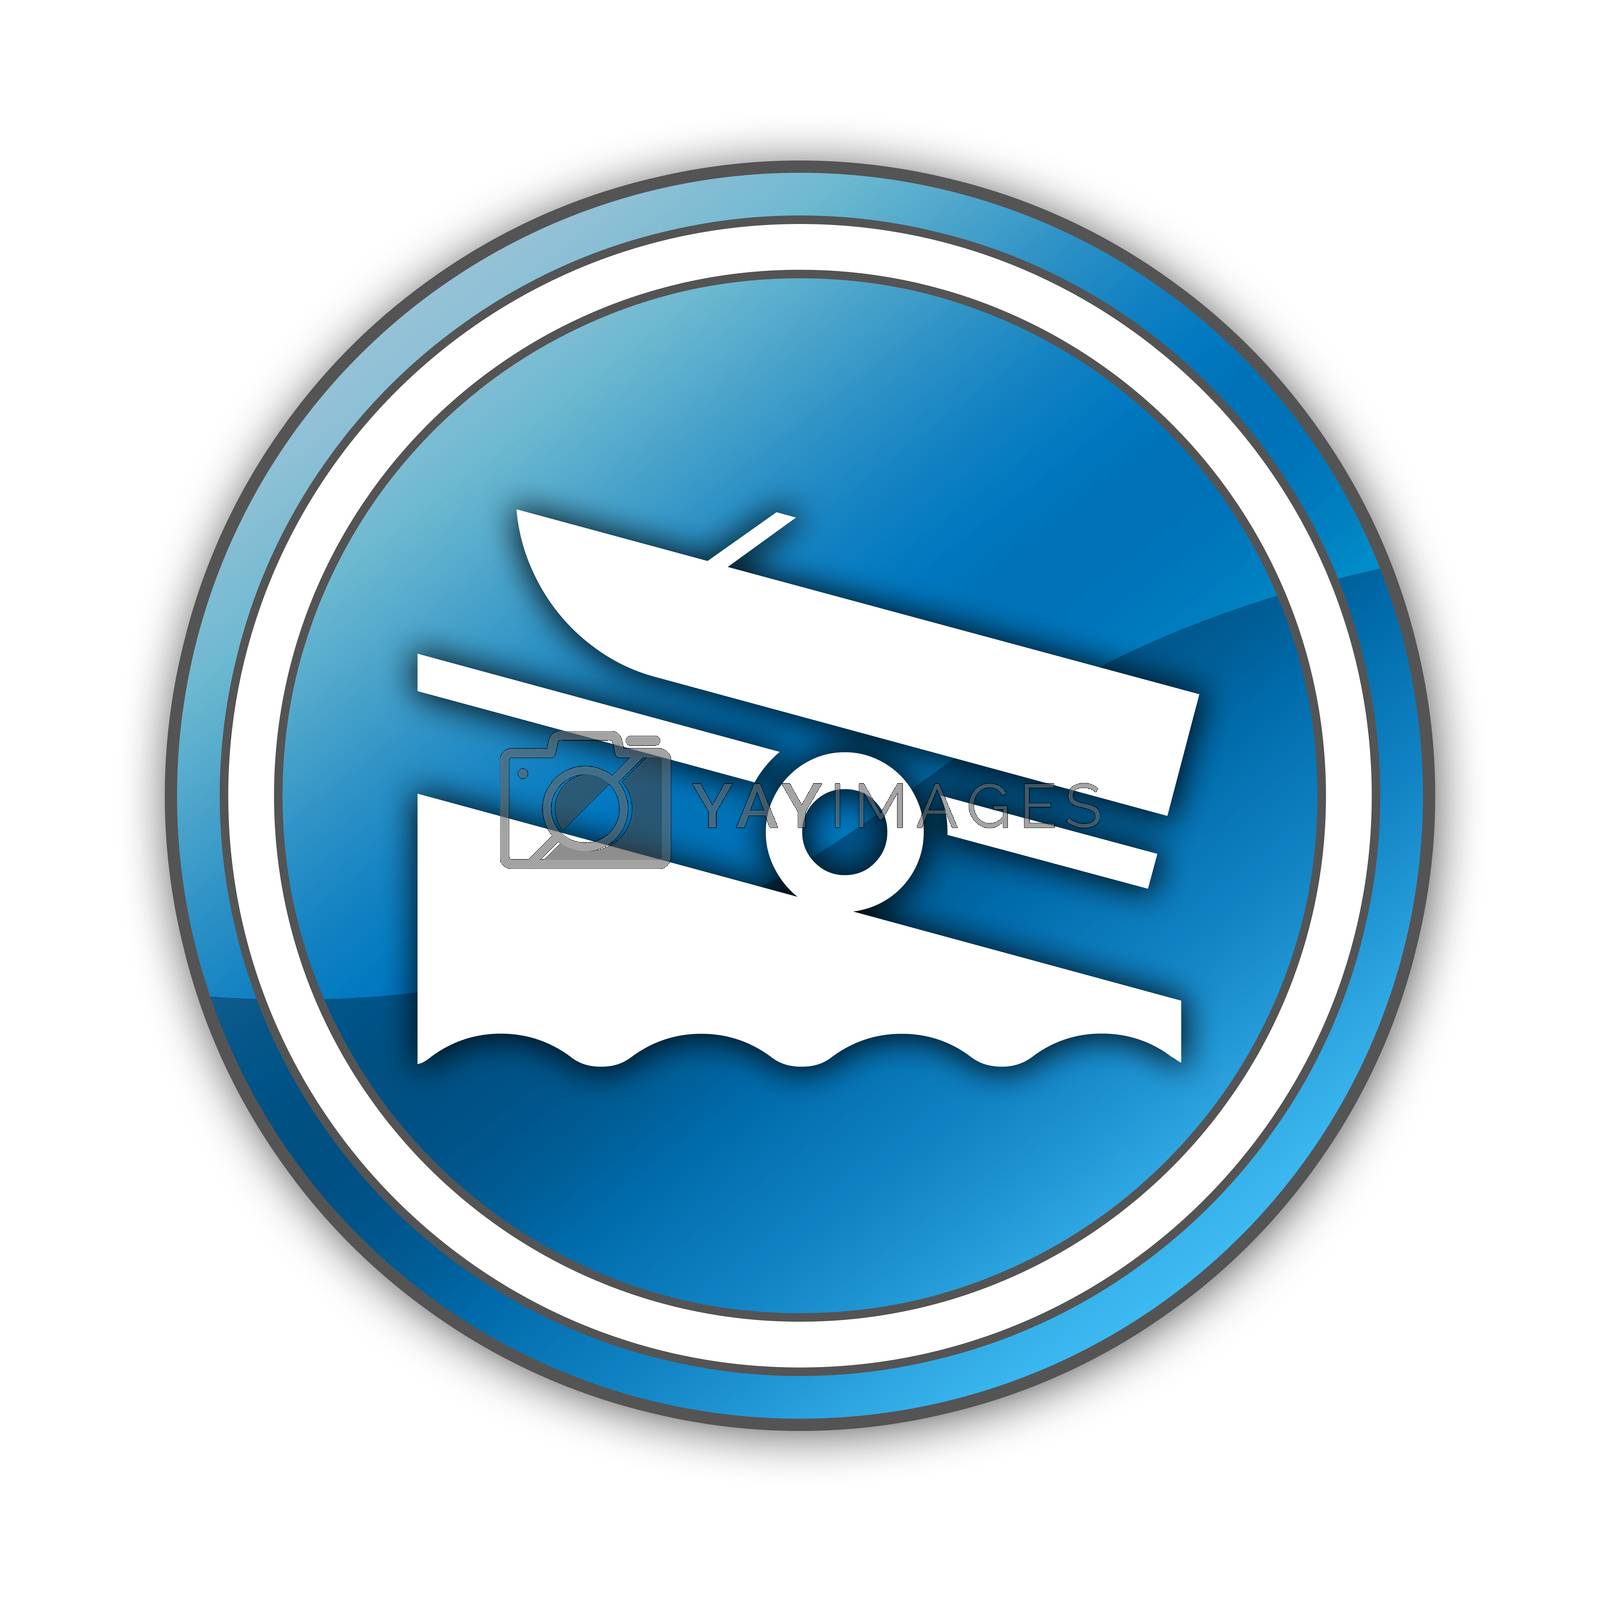 Royalty free image of Icon, Button, Pictogram Boat Ramp by mindscanner